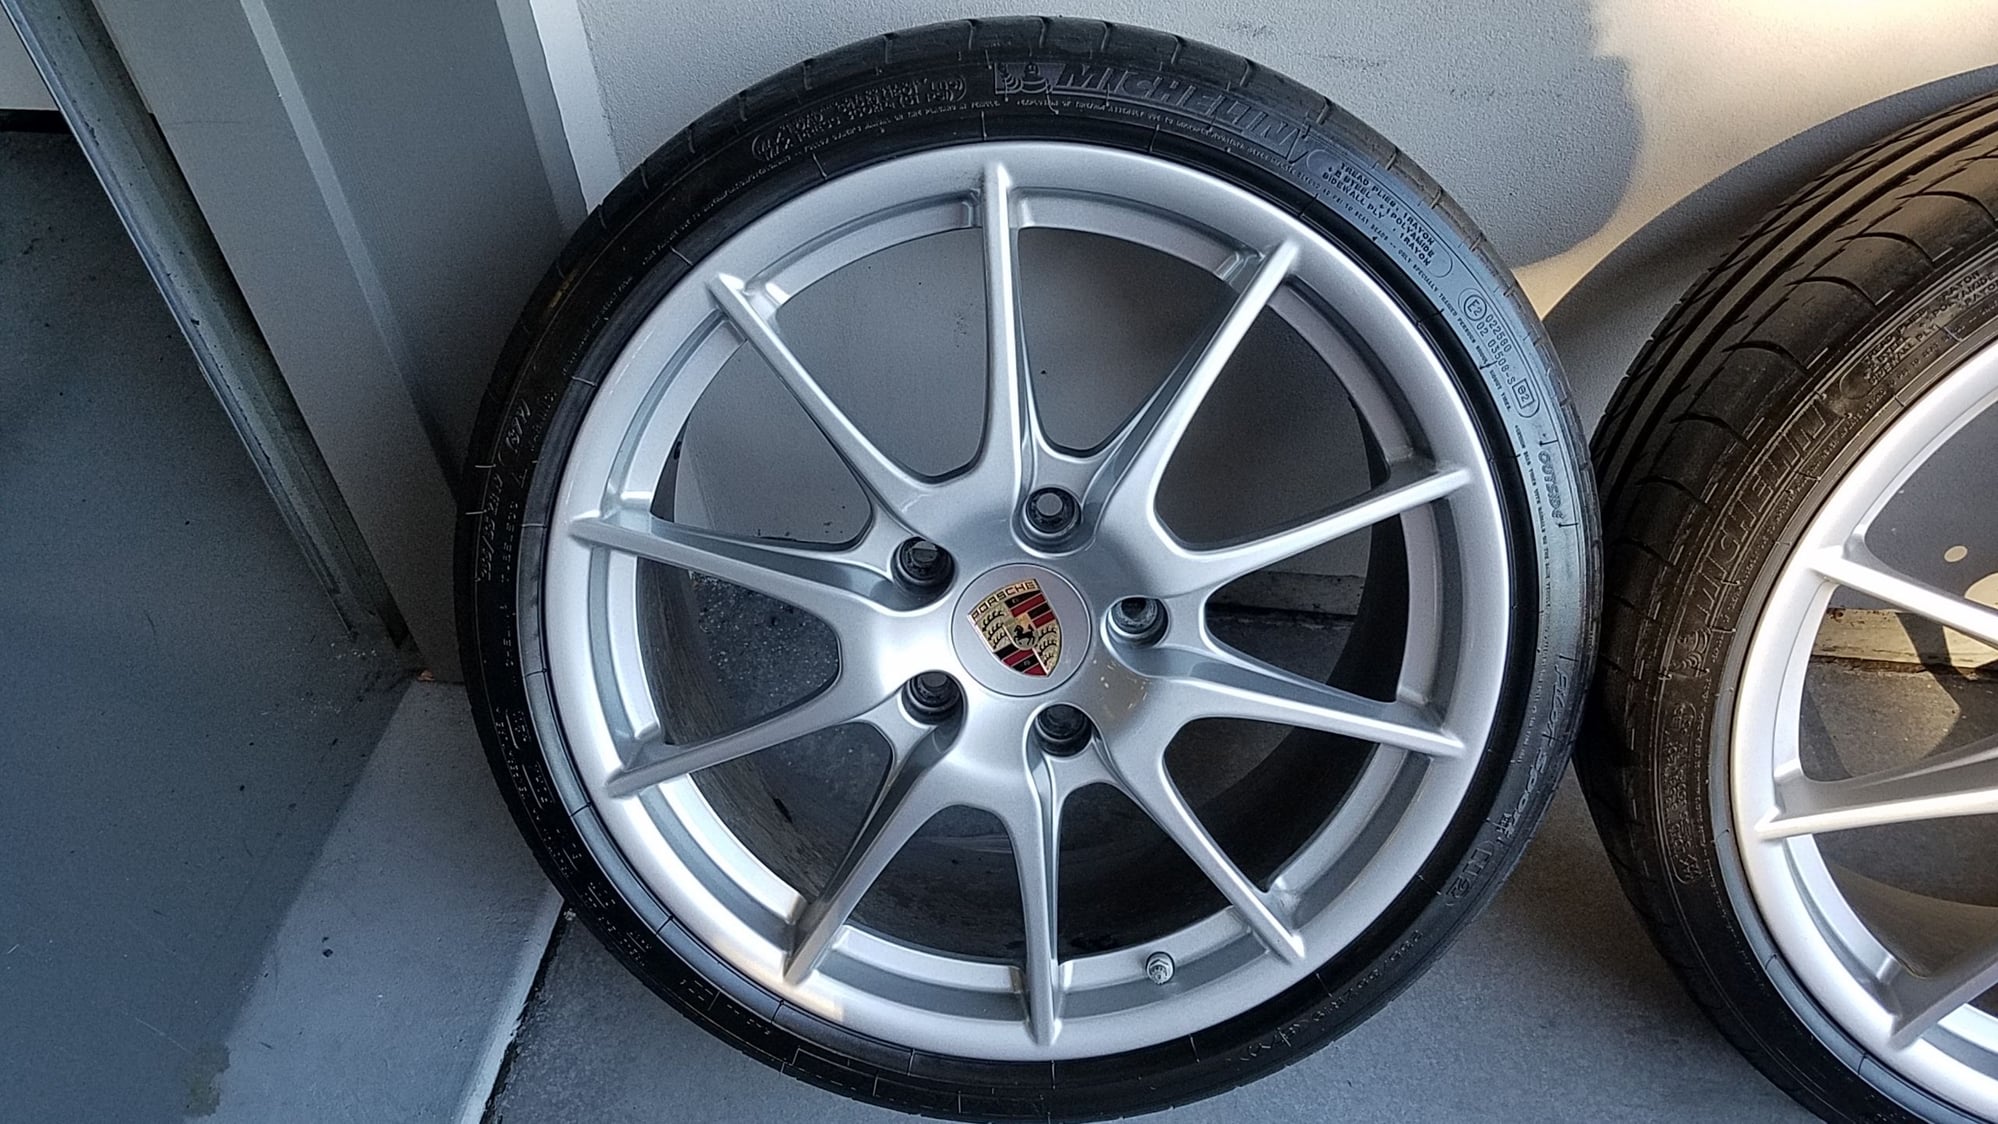 Wheels and Tires/Axles - FS NorCal - 987 Cayman R/986 Boxster Spyder OEM 19 silver wheels set w Michelin PS2 - Used - 1999 to 2012 Porsche Boxster - 2006 to 2012 Porsche Cayman - Corte Madera, CA 94925, United States